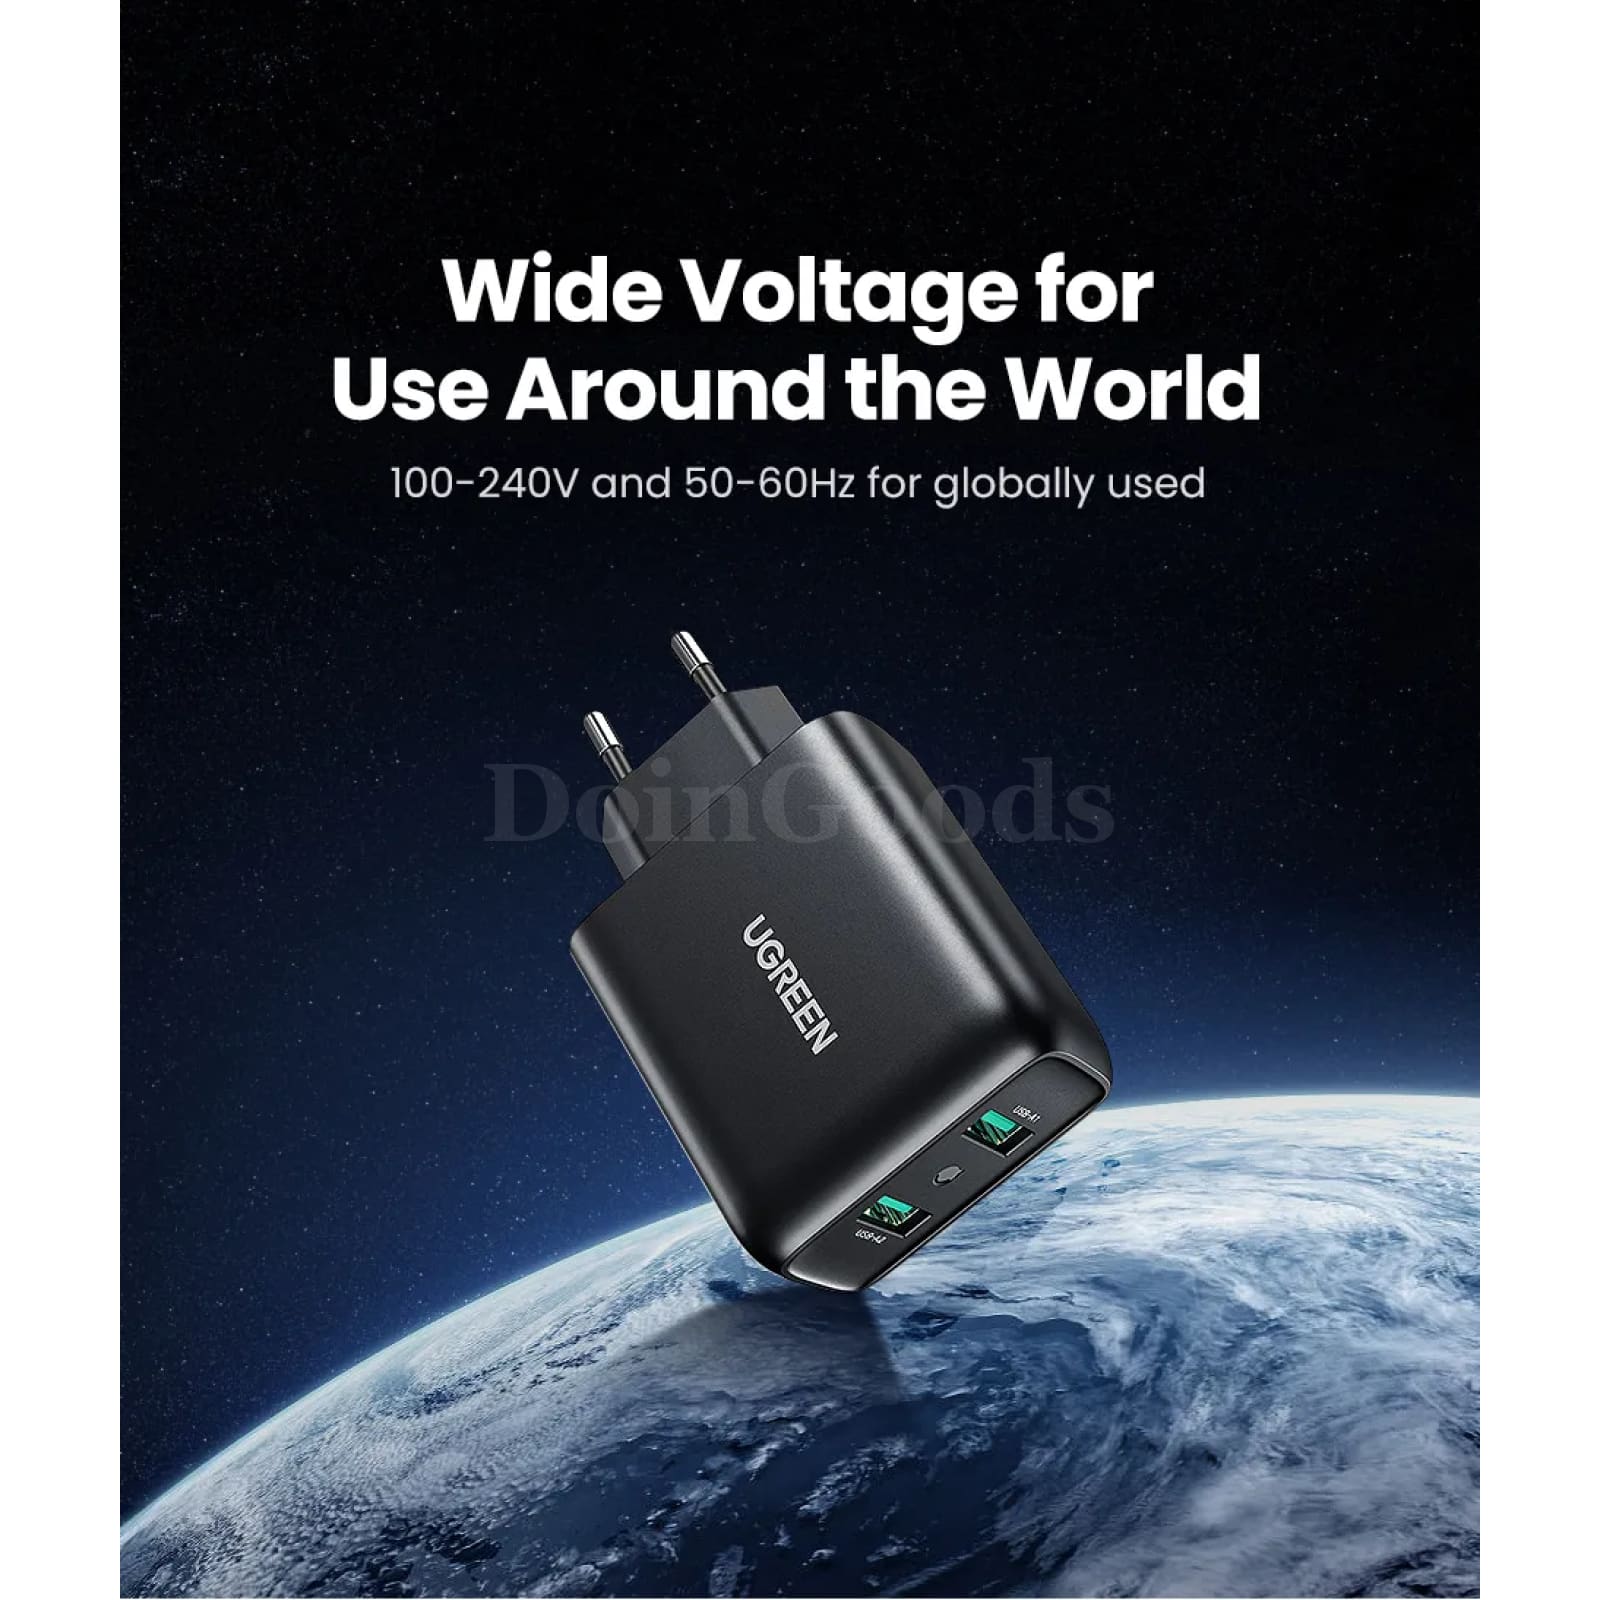 Ugreen Usb Charger Quick Charge 3.0 36W Fast Adapter Qc3.0 Mobile Phone 301635